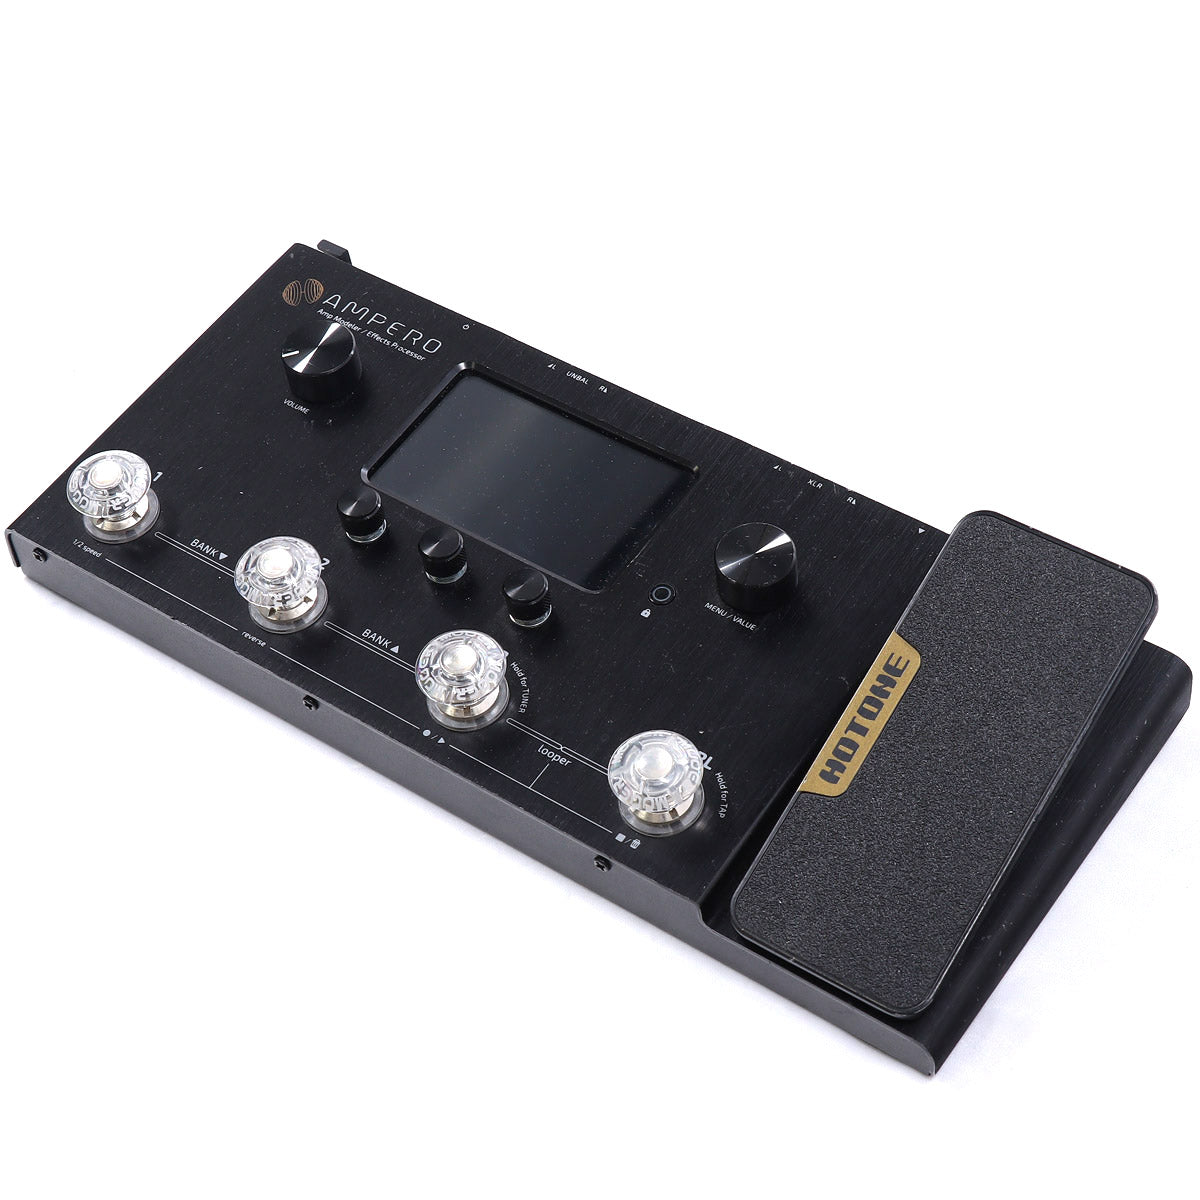 [SN 05020006405] USED HOTONE / AMPERO Multi-effects pedal for guitar [08]